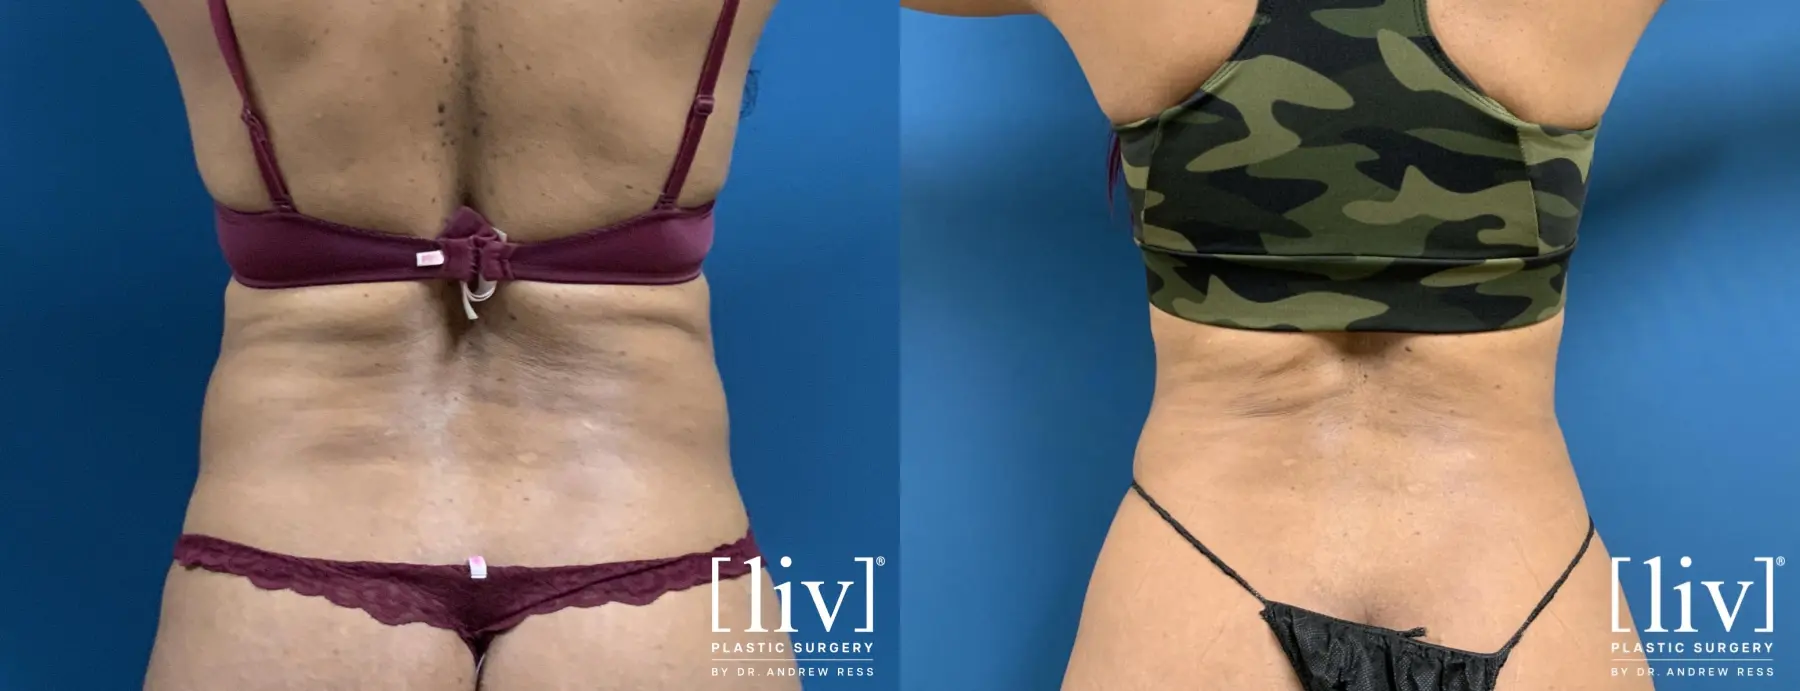 Liposuction: Patient 8 - Before and After 4